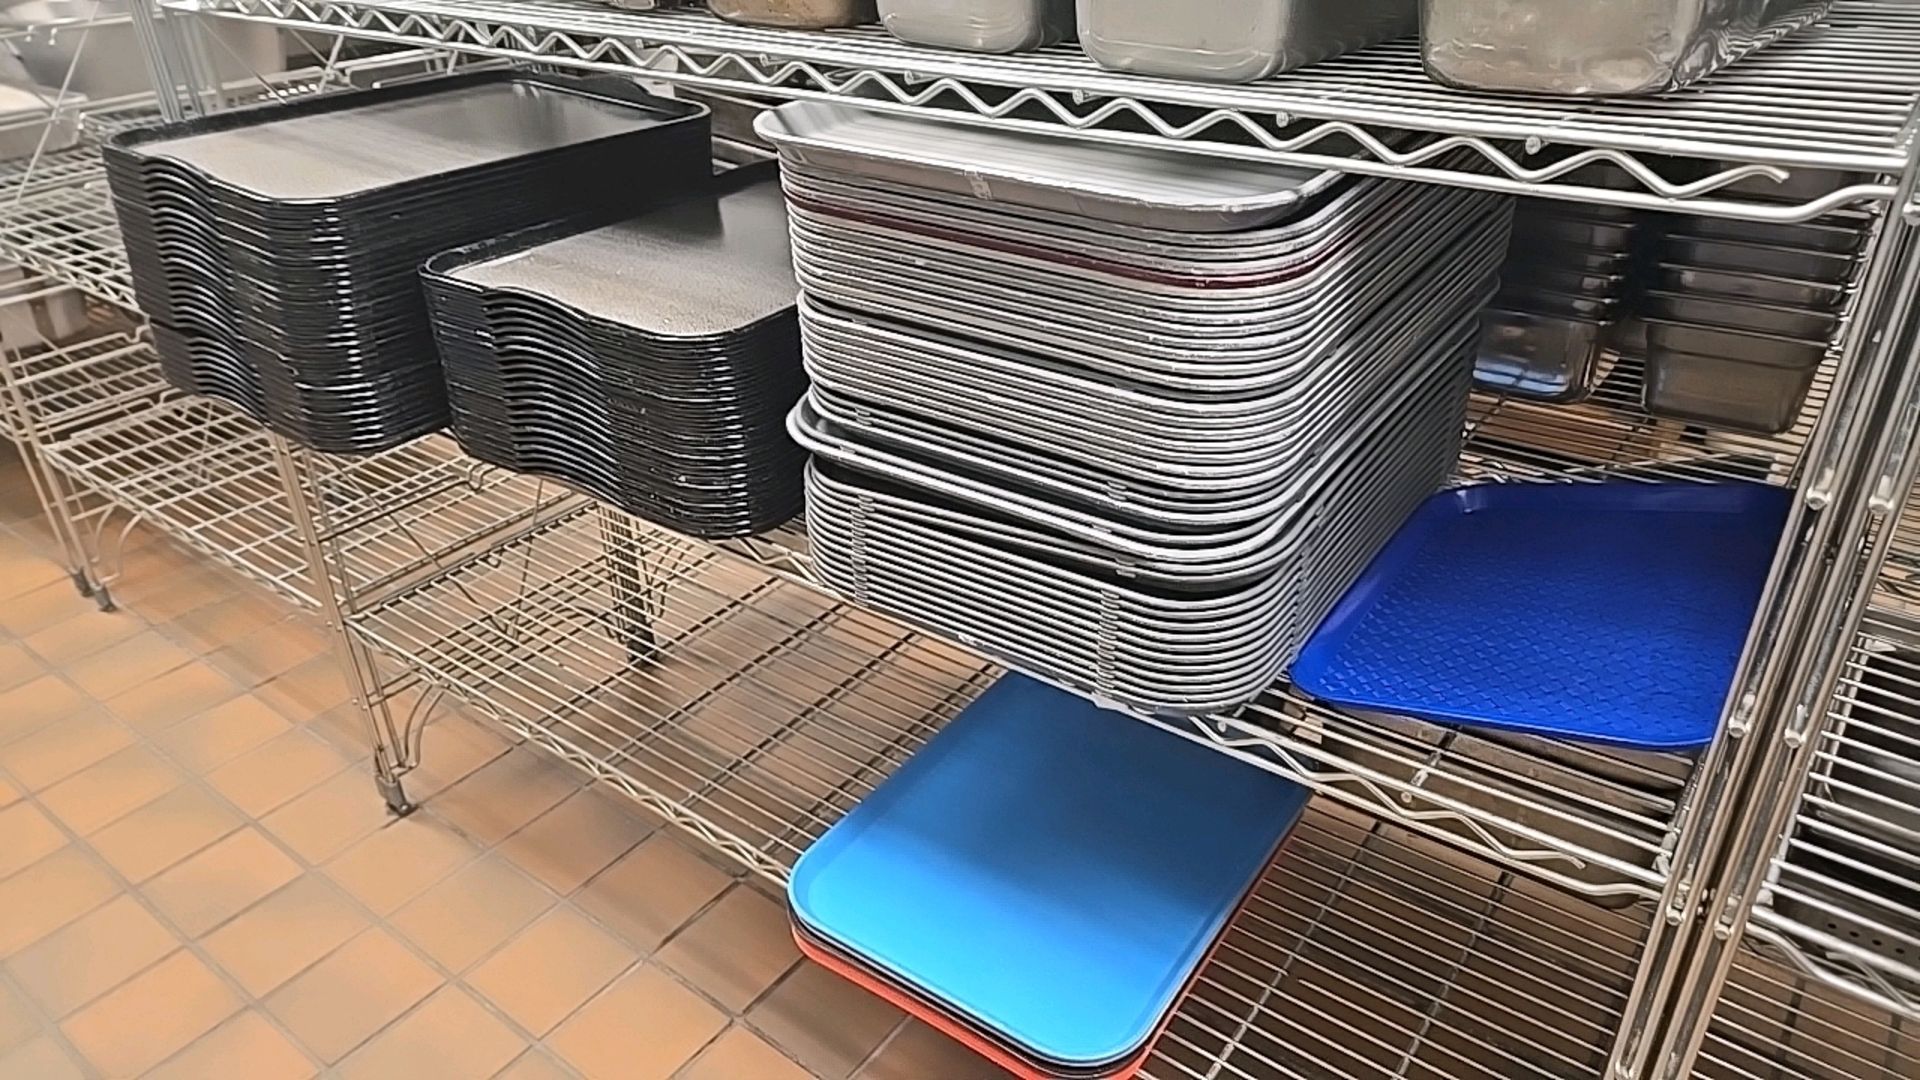 SERVING TRAYS